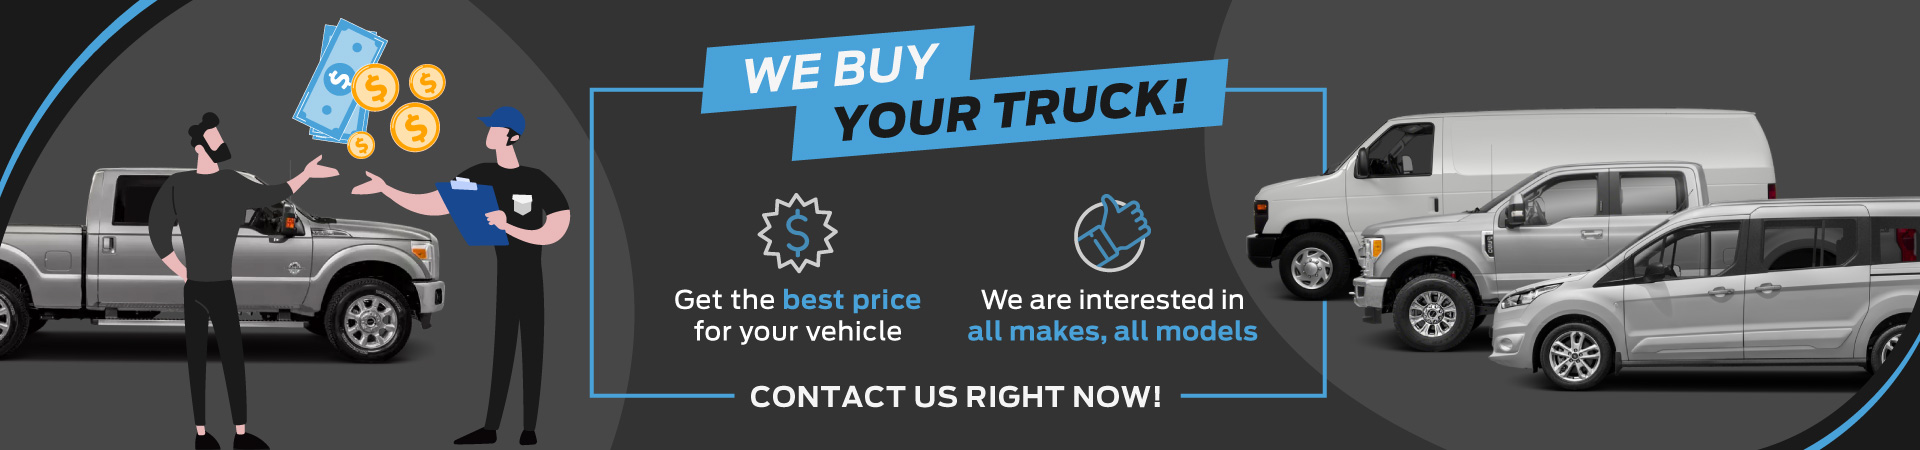 We buy your truck, contact us!